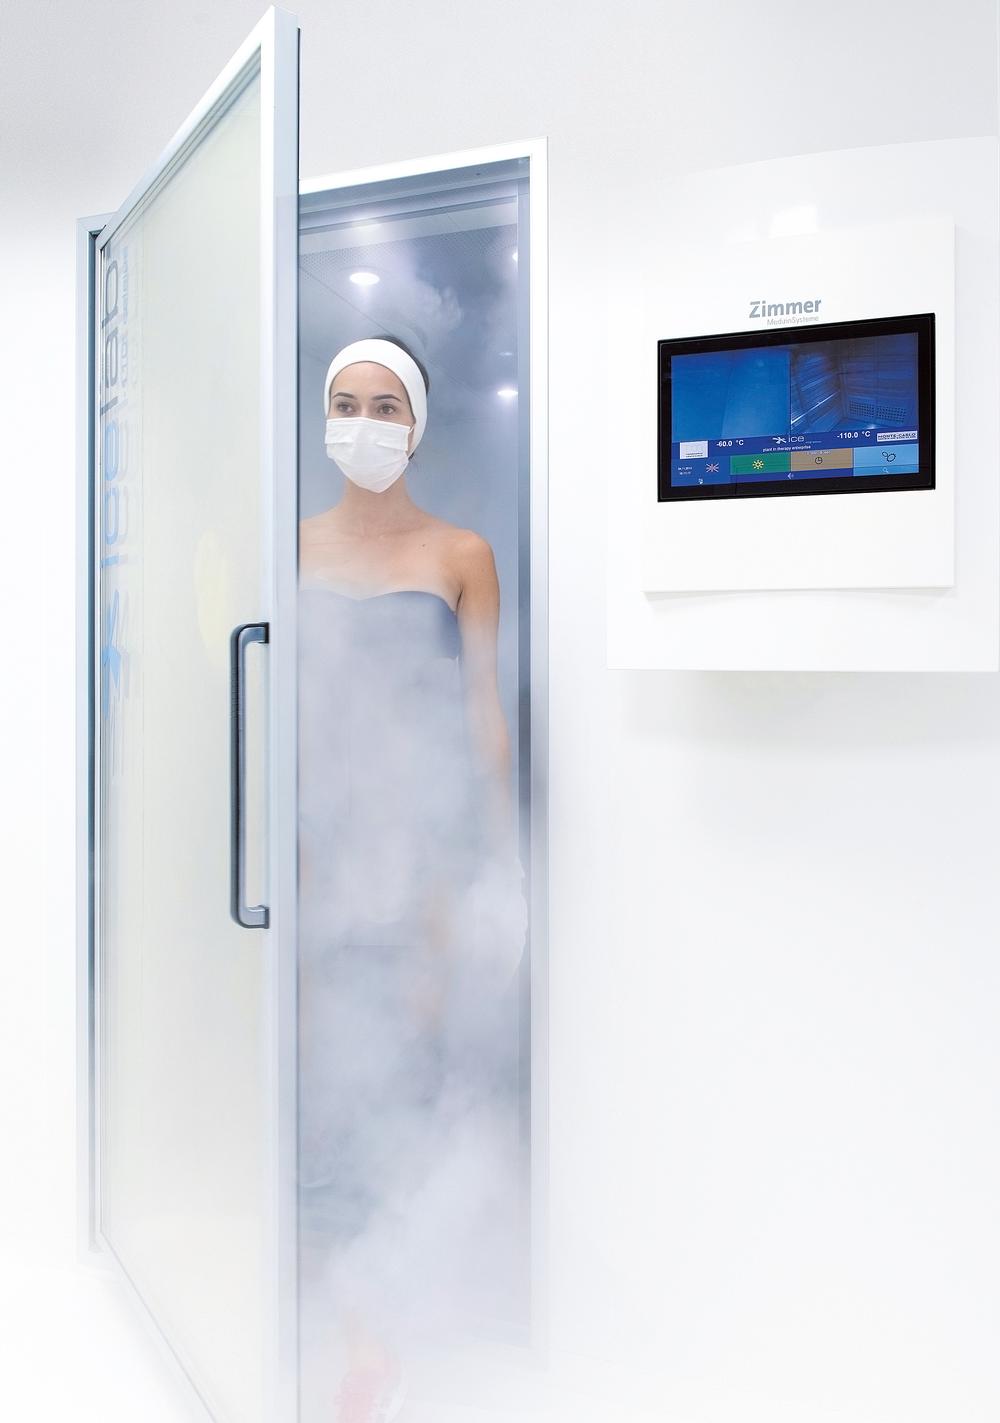 The icelab surrounds the entire body – including the head – with cold air